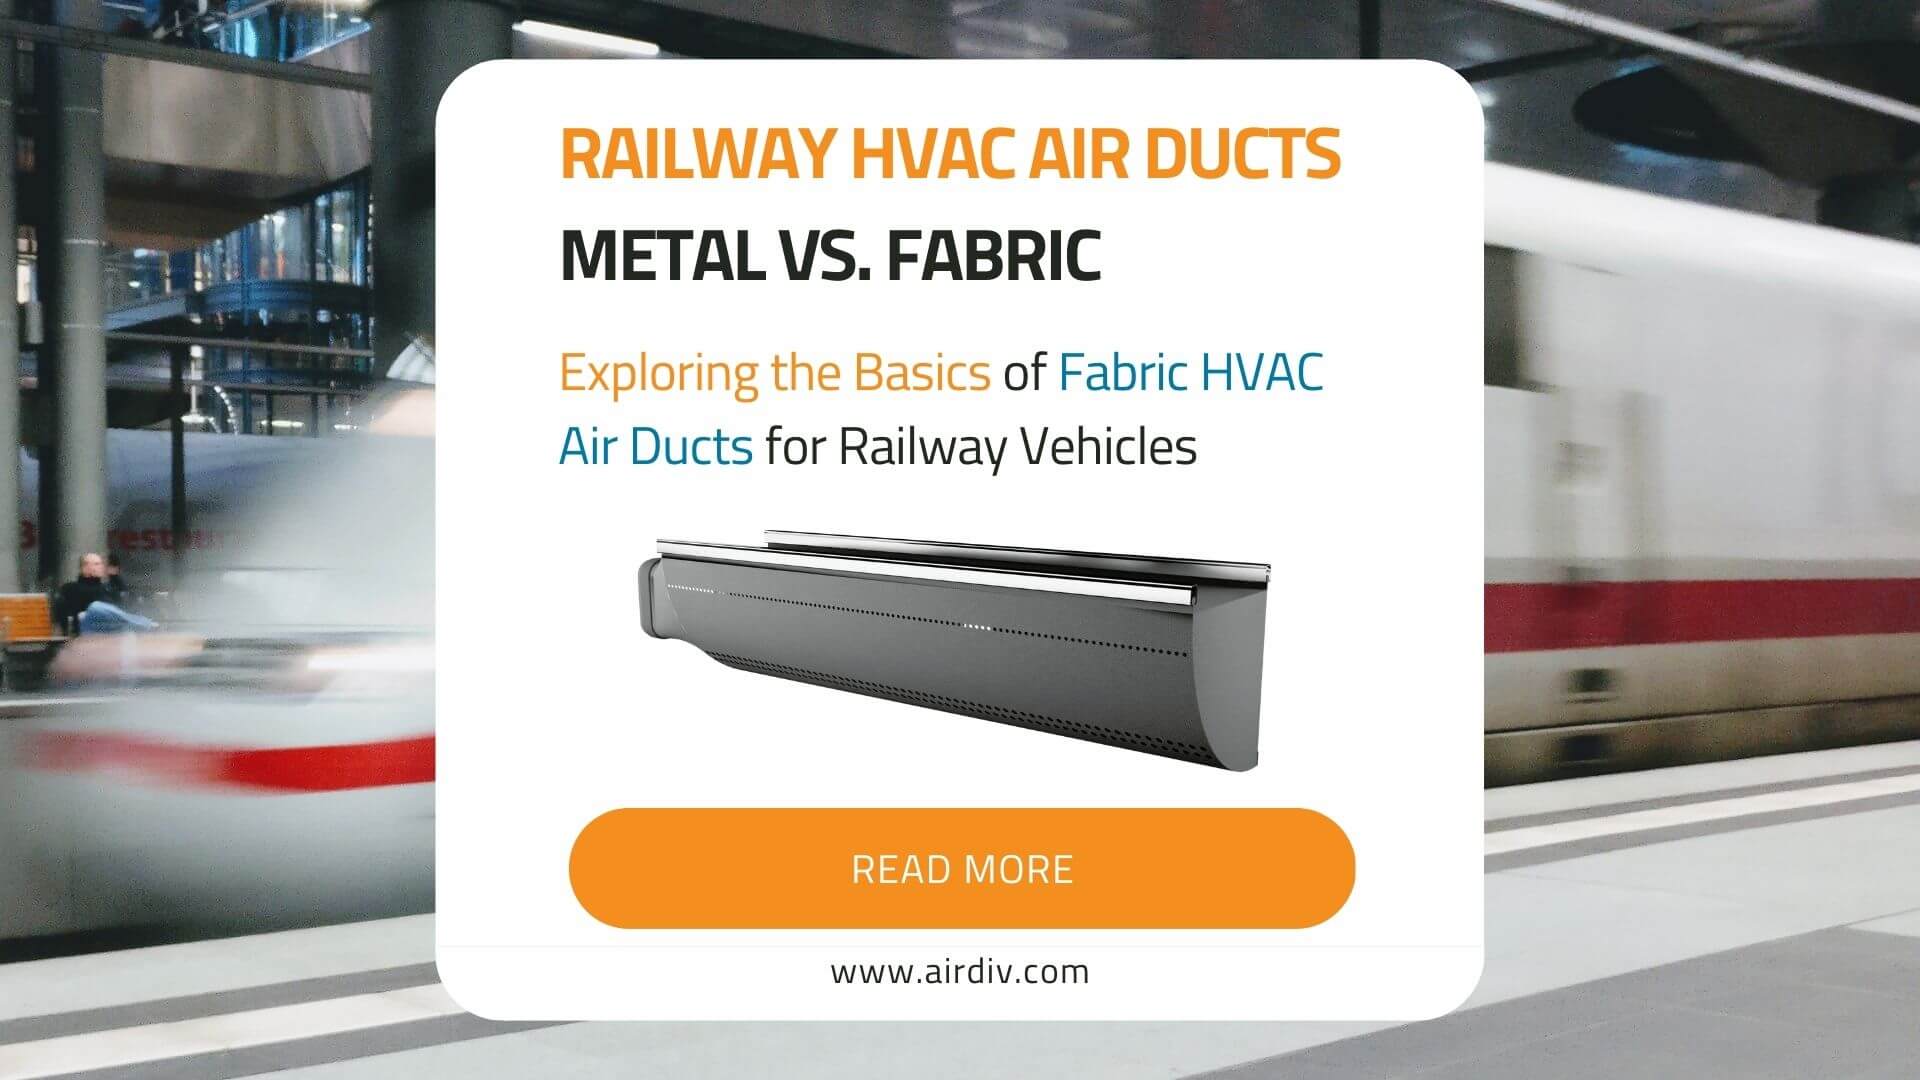 Exploring the Basics of Fabric HVAC Air Ducts for Railway Vehicles